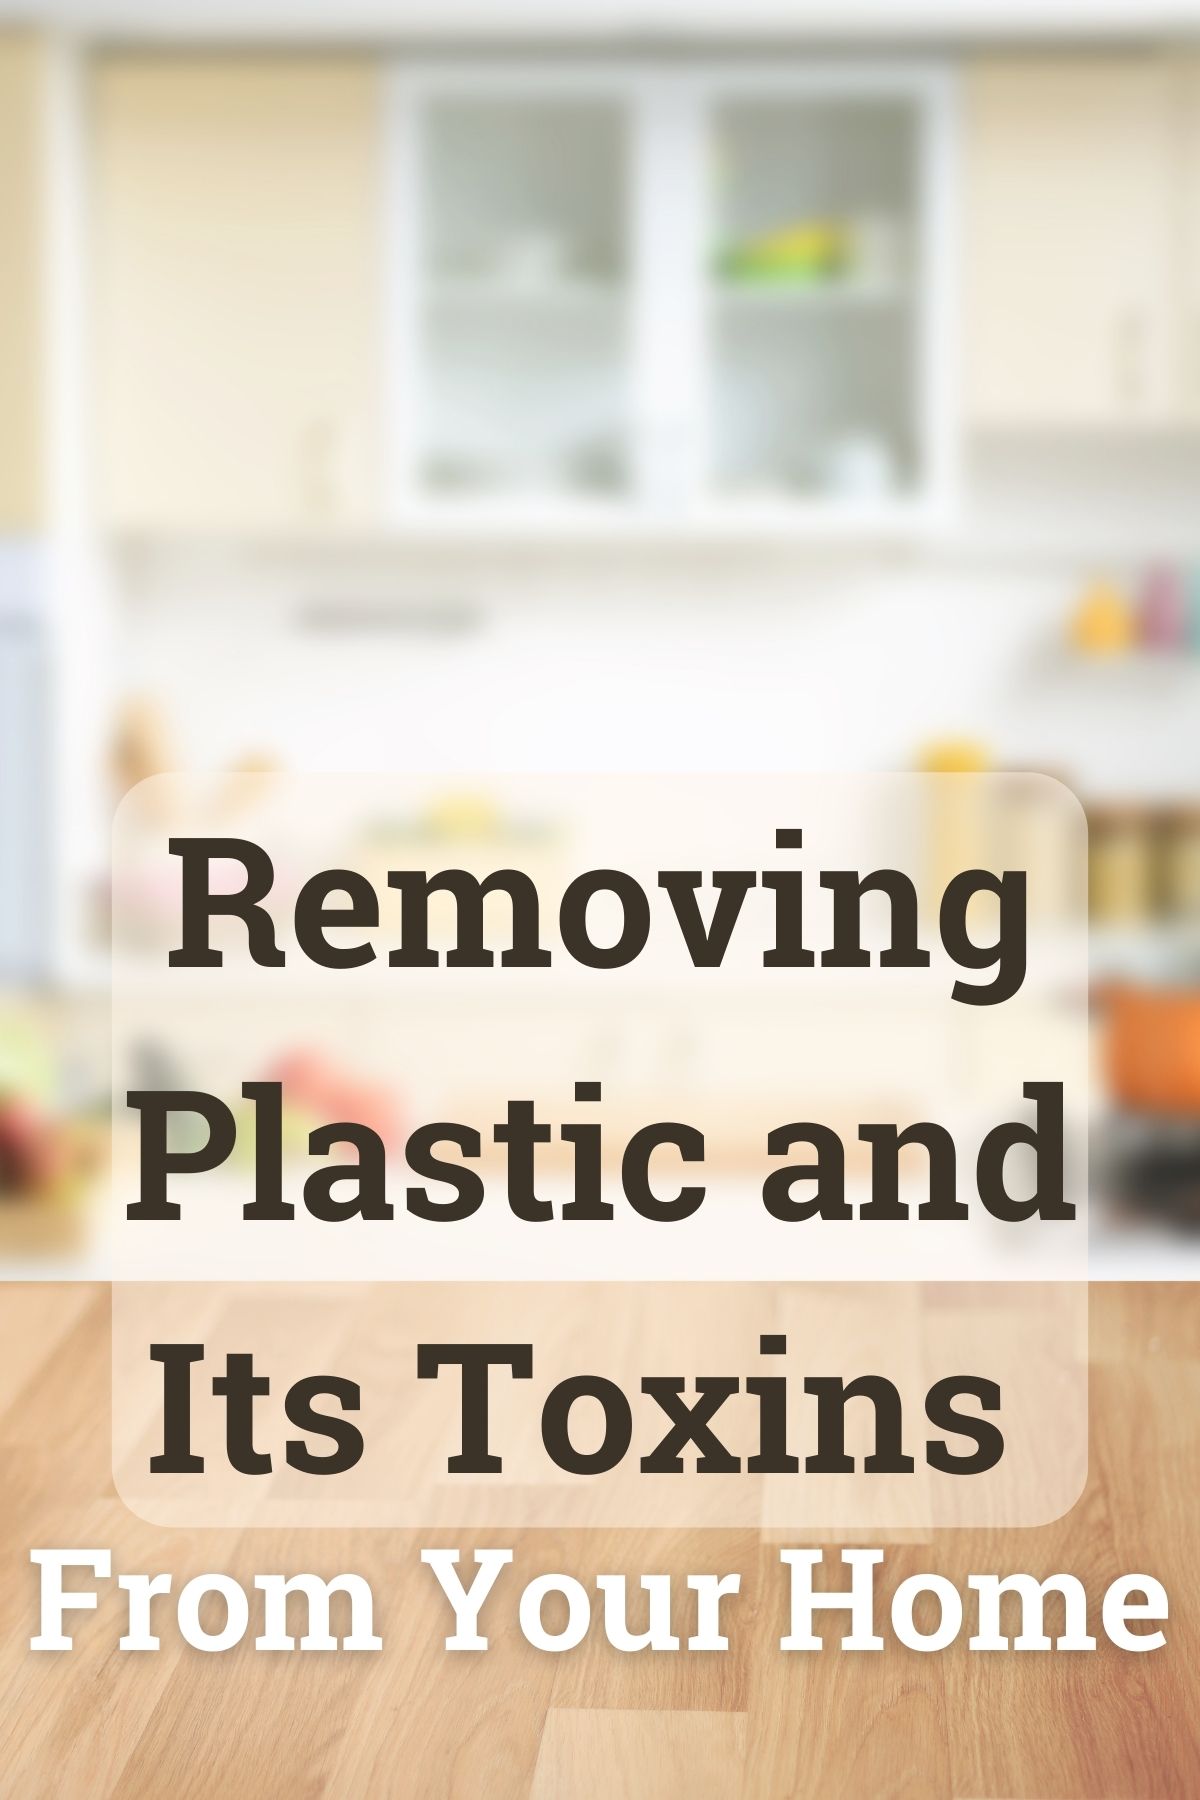 Kitchen in background of removing plastic and toxins from home starting in kitchen for PIN